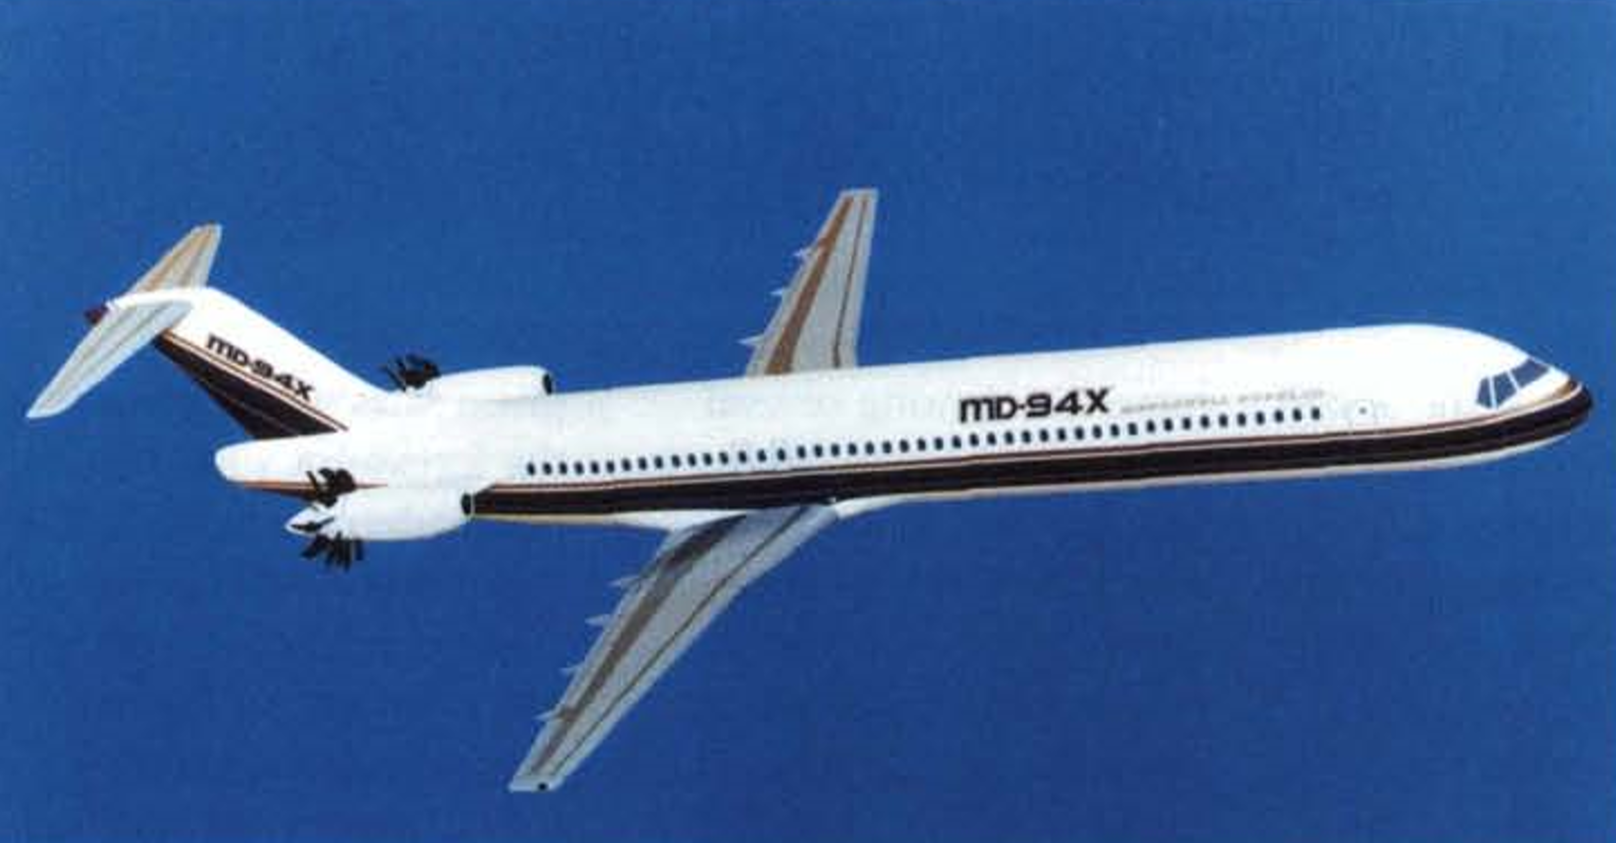 A render of the proposed McDonnell Douglas MD-94X propfan aircraft.